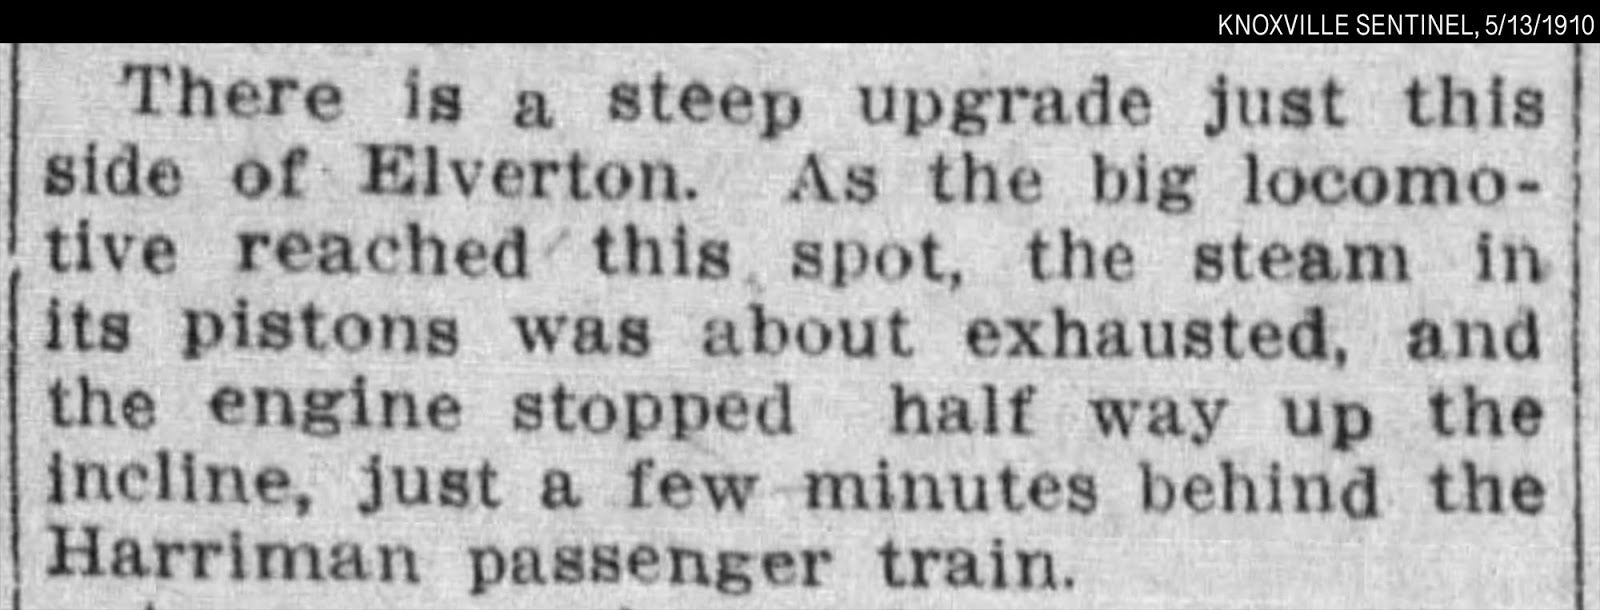 1910 newspaper article describing the “runaway train” incident, which notes the hill highlighted above.